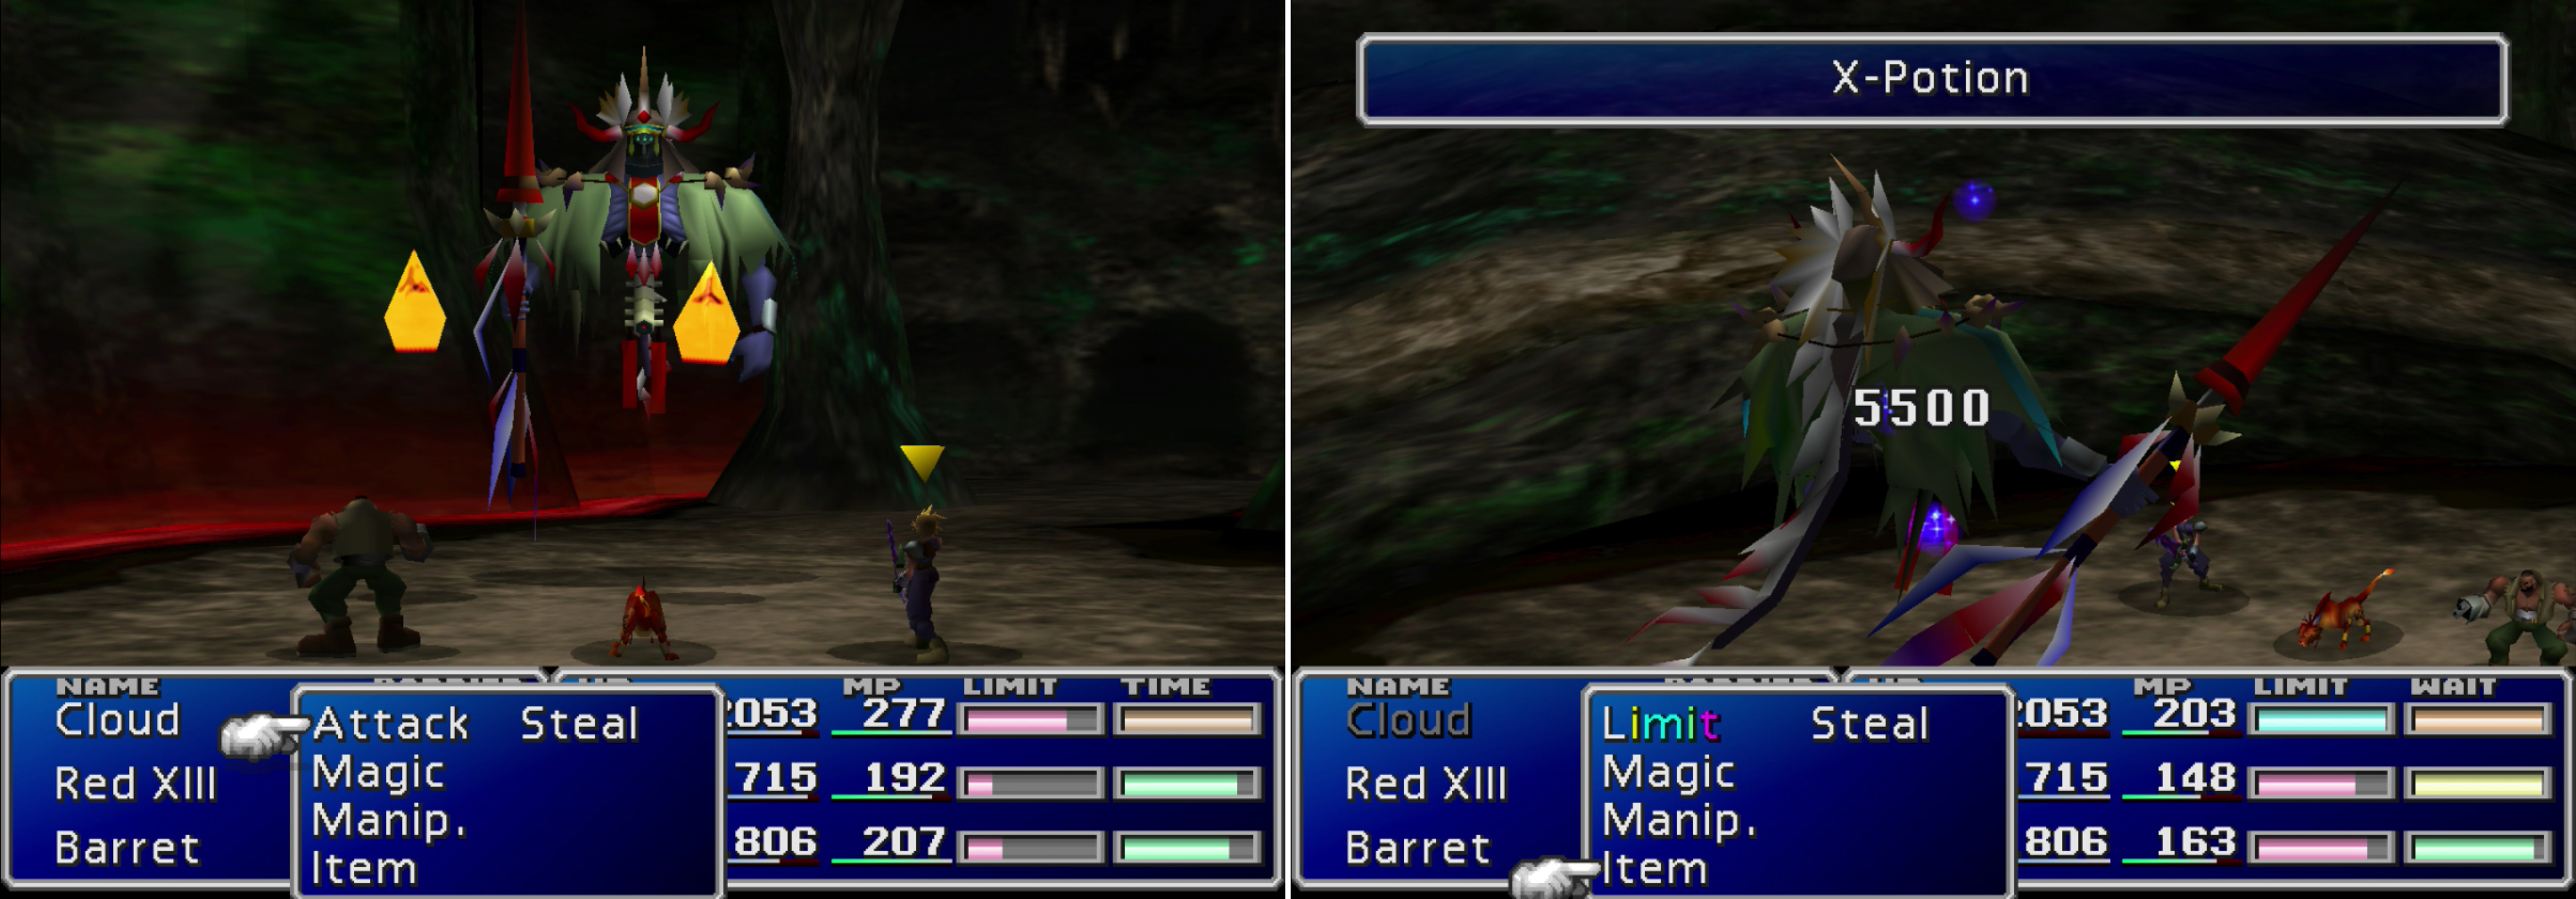 Gi Nattack is joined by two Soul Fire minion, who are only too happy to inflict fire damage on the party (left). If you’ve willing to spare an X-Potion, Gi Nattack can be killed in a single move (right). It doesn’t pay to be undead in a Final Fantasy game.